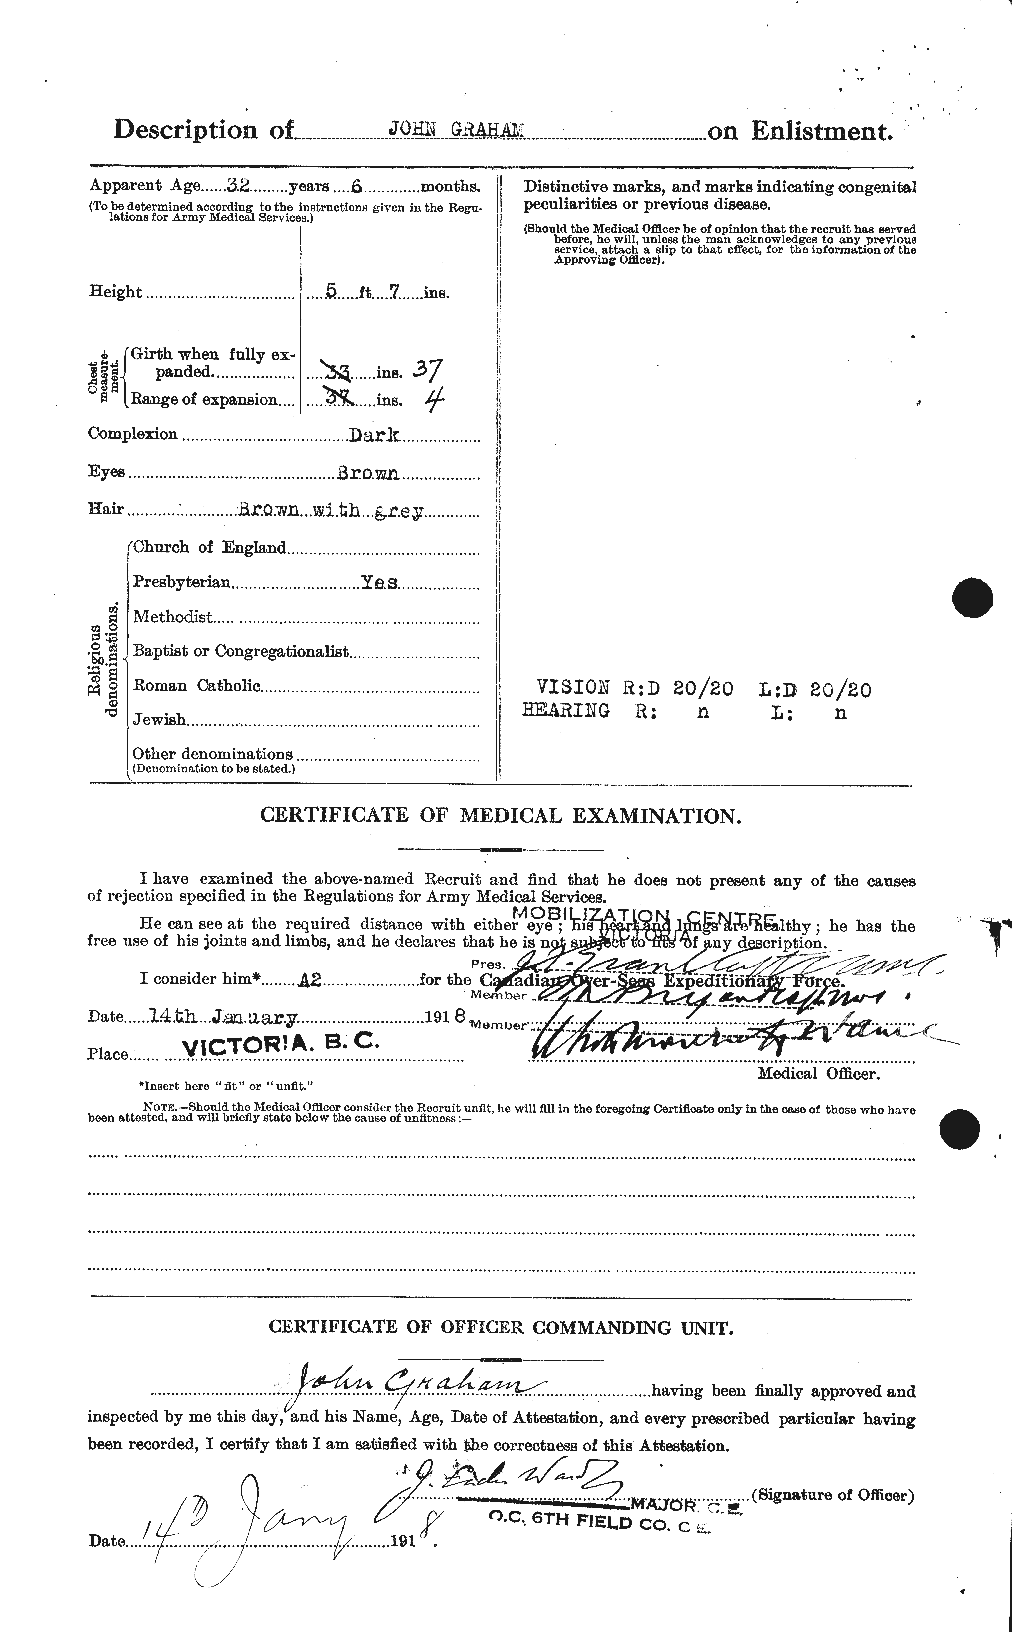 Personnel Records of the First World War - CEF 359128b